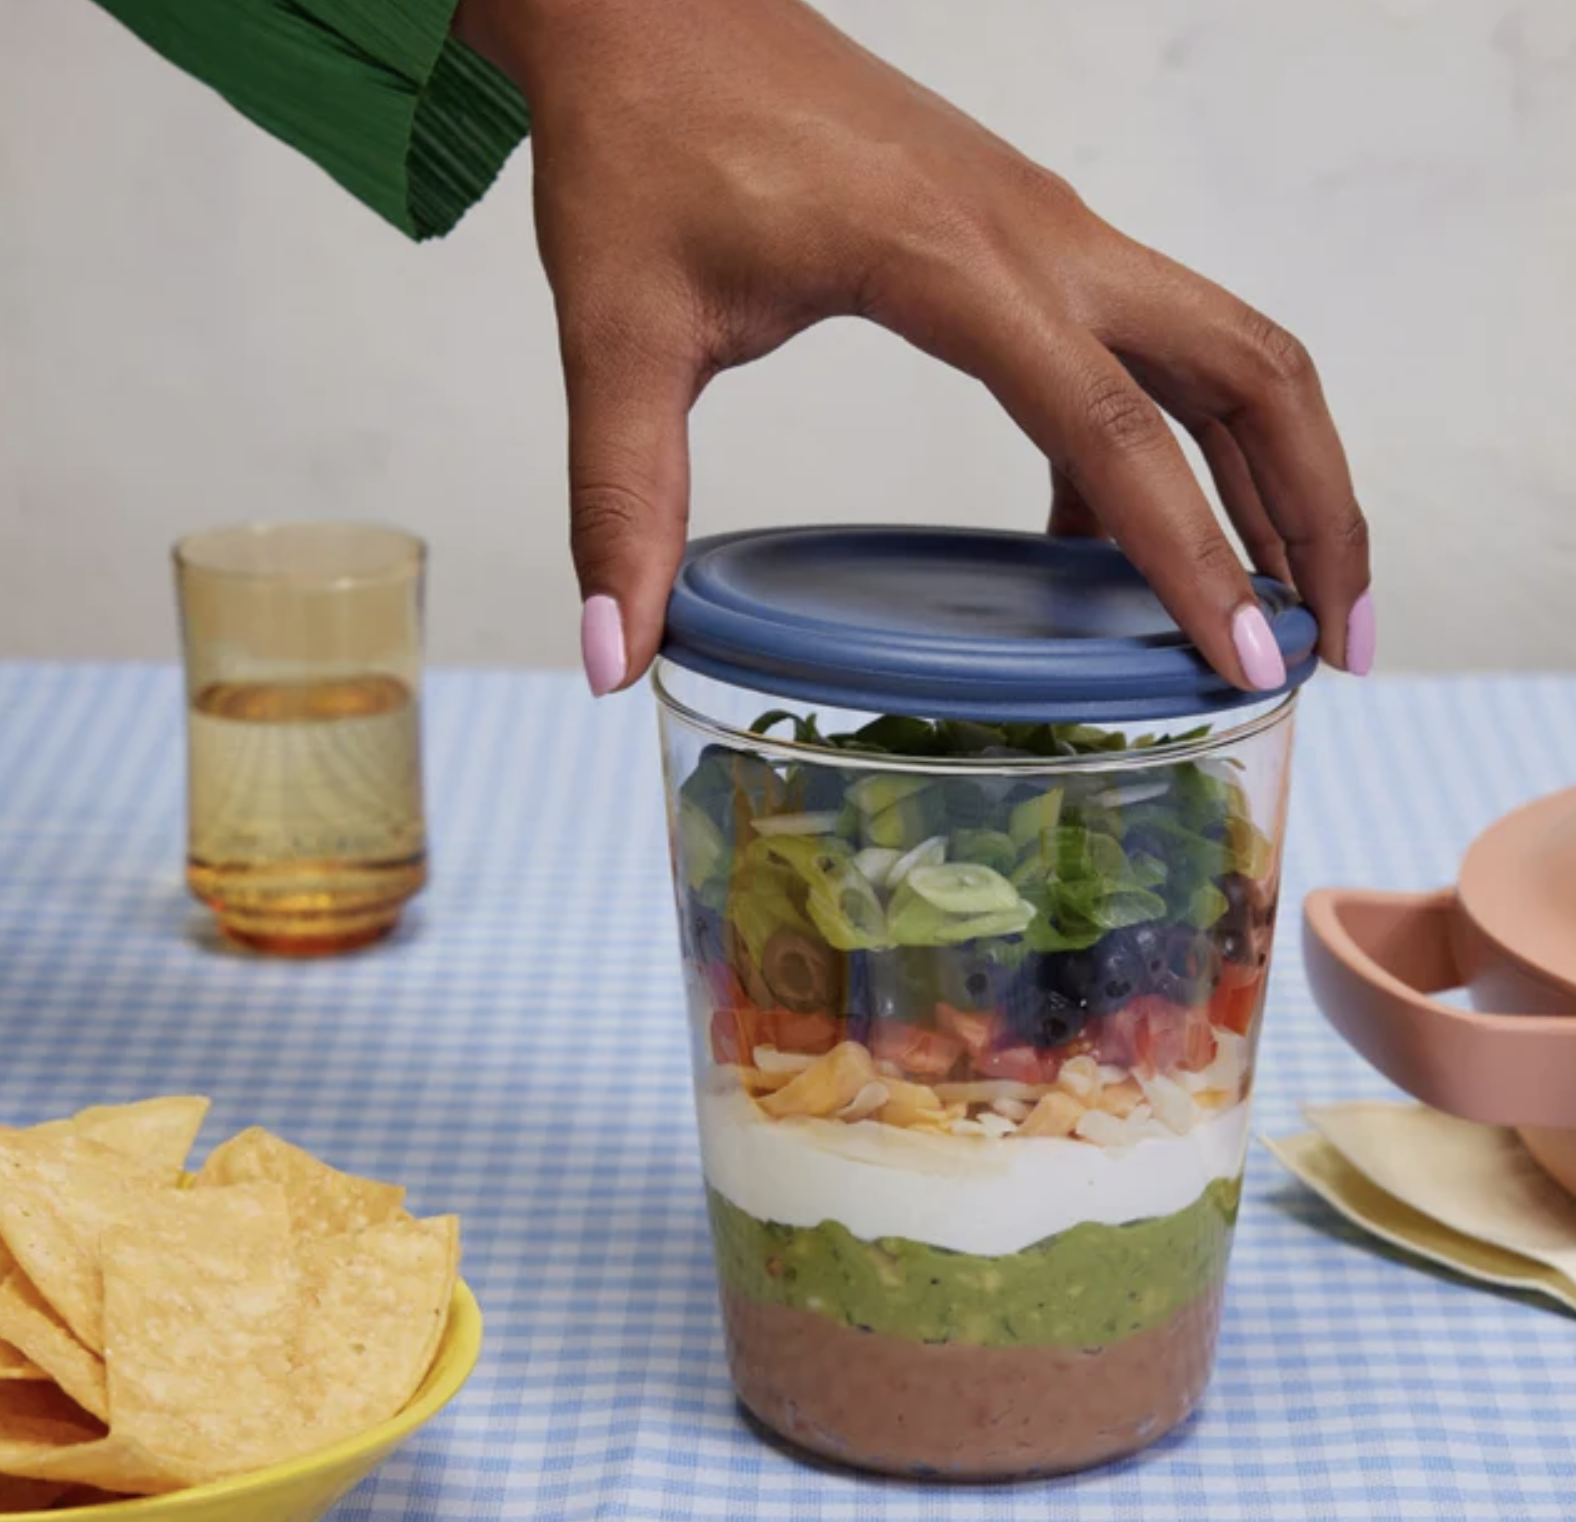 A person putting a lid on a container filled with seven layer dip